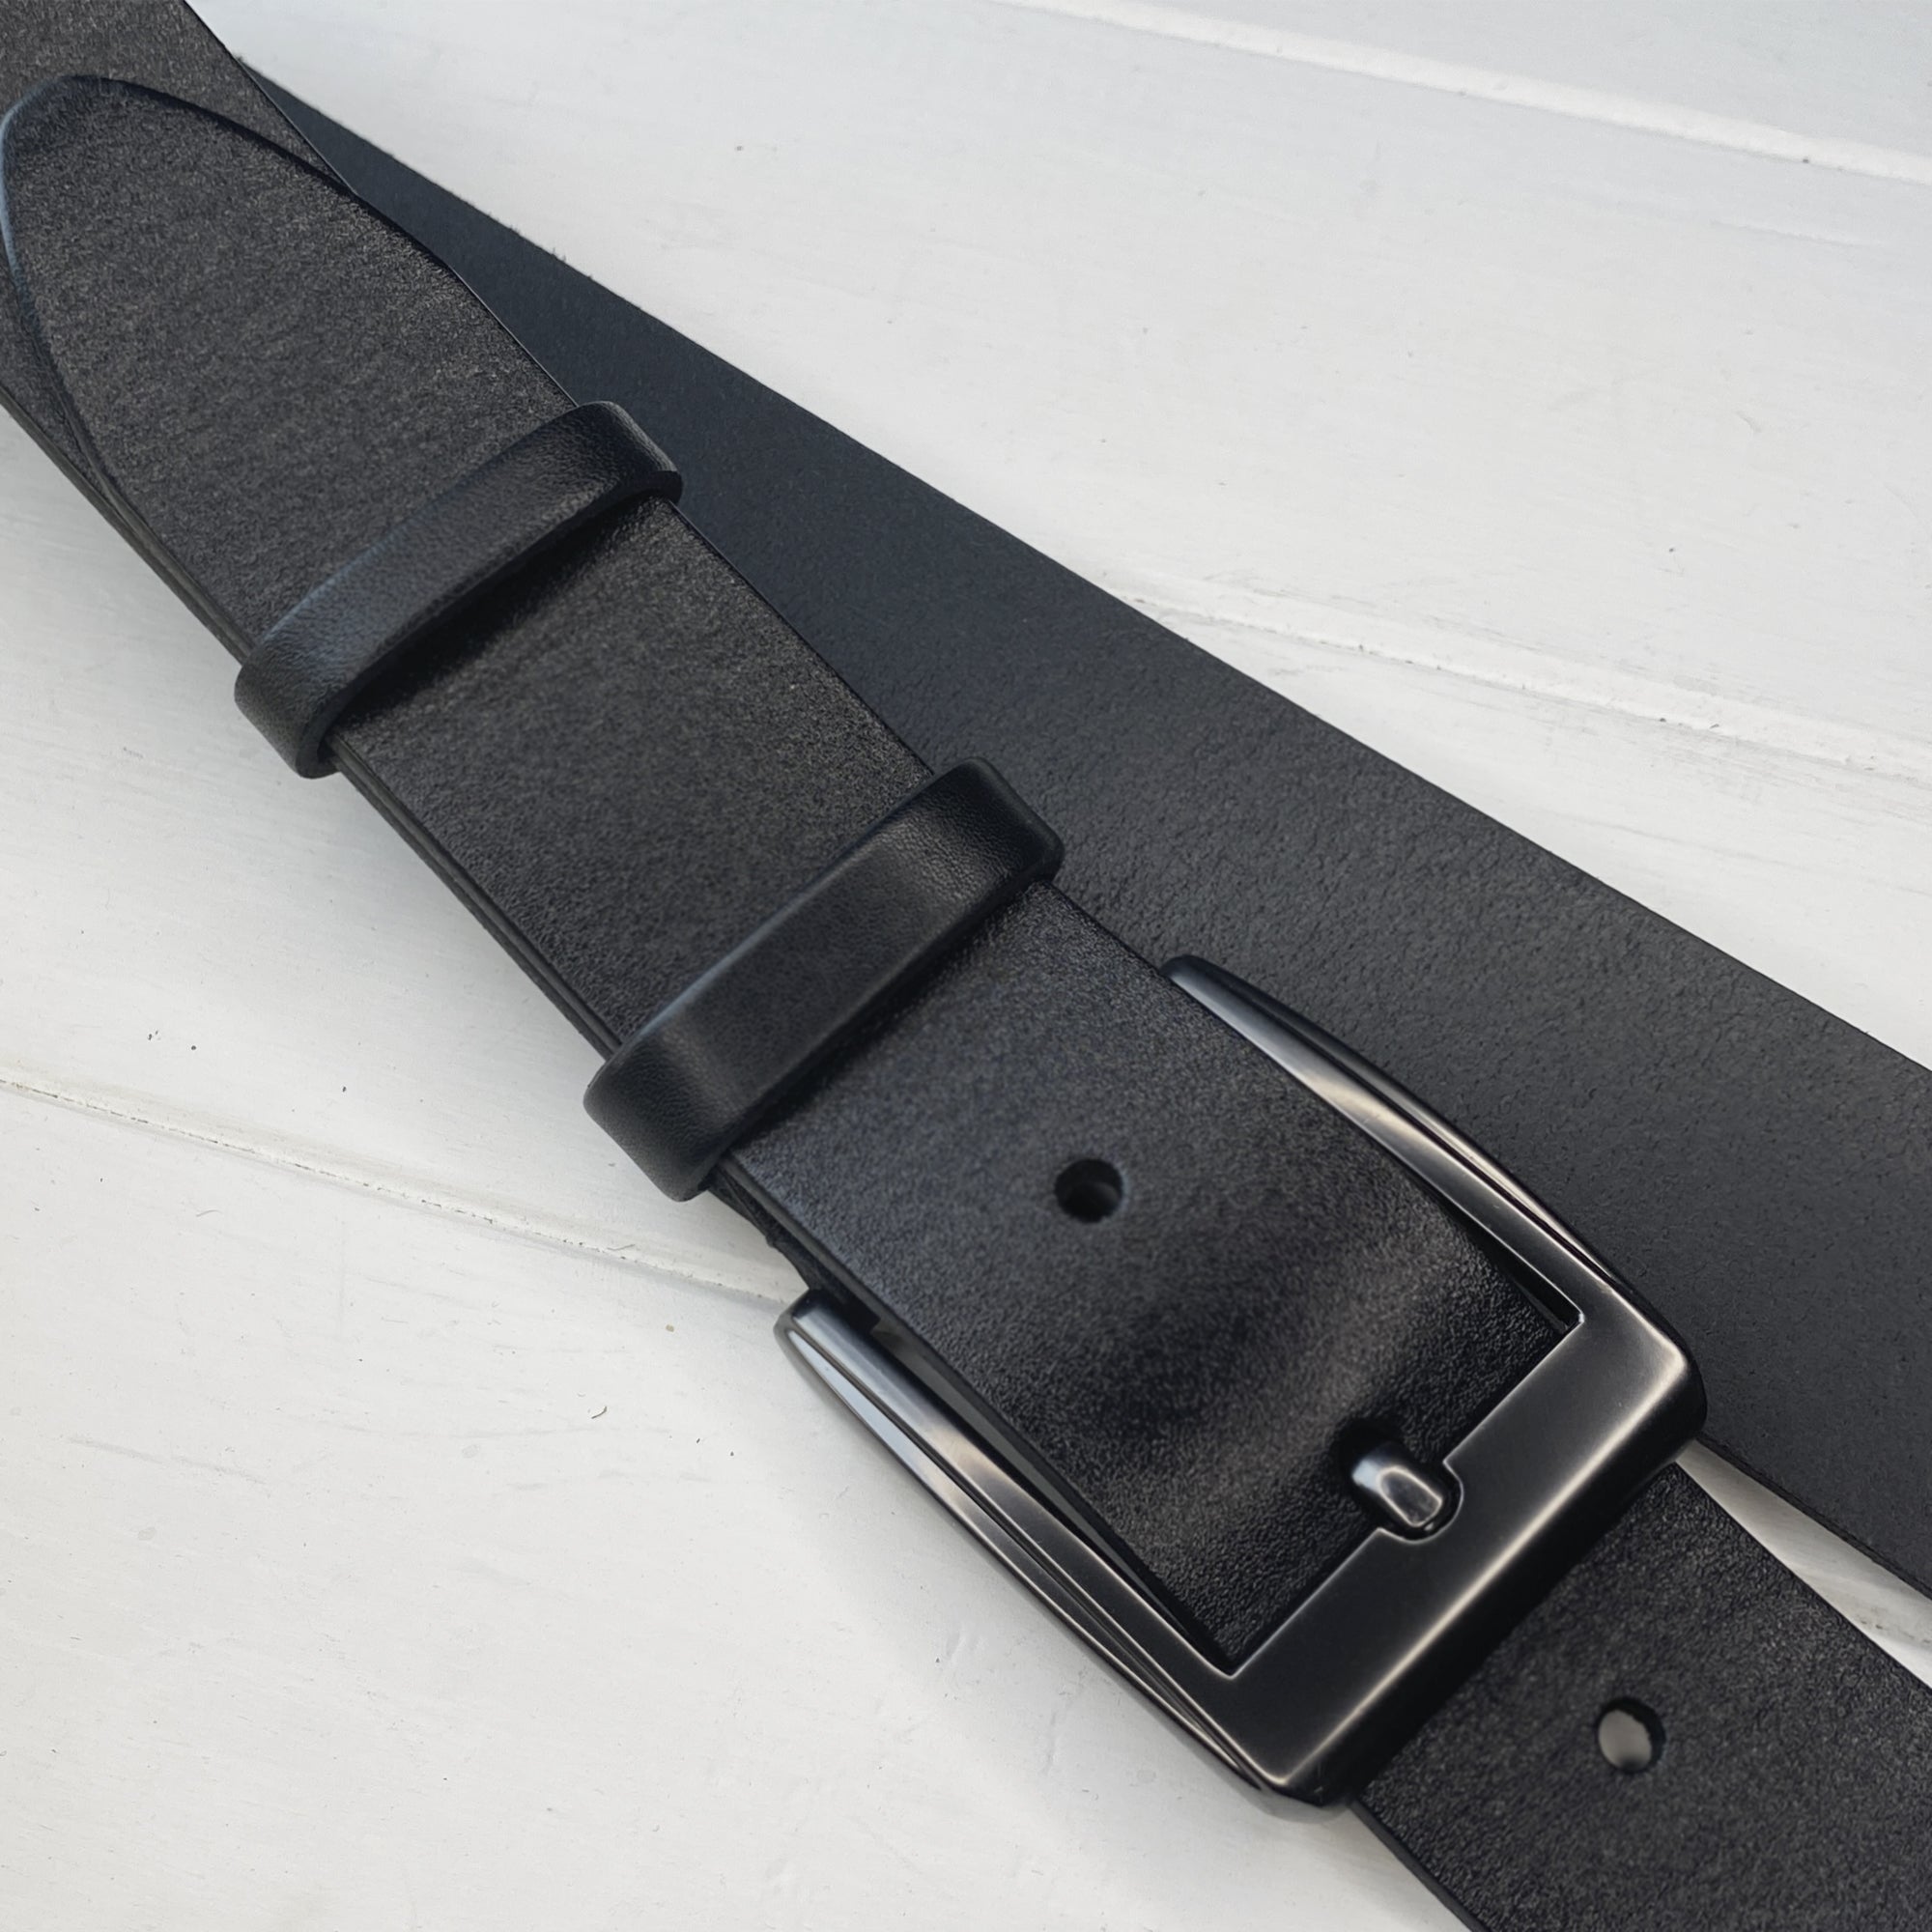 Leather Belt Black Personalized engraving